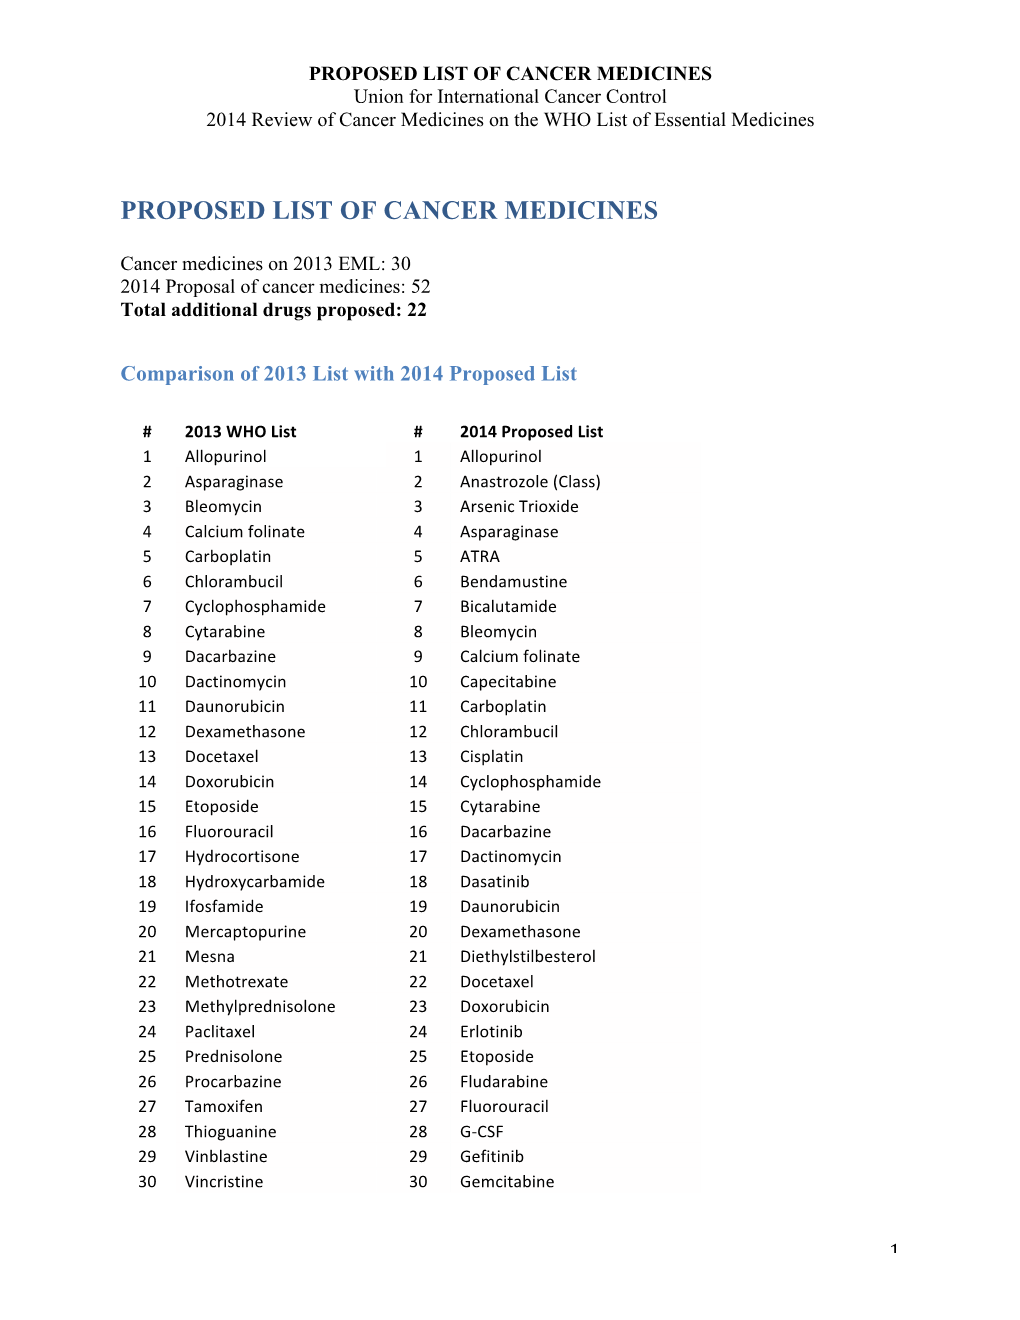 PROPOSED LIST of CANCER MEDICINES Union for International Cancer Control 2014 Review of Cancer Medicines on the WHO List of Essential Medicines